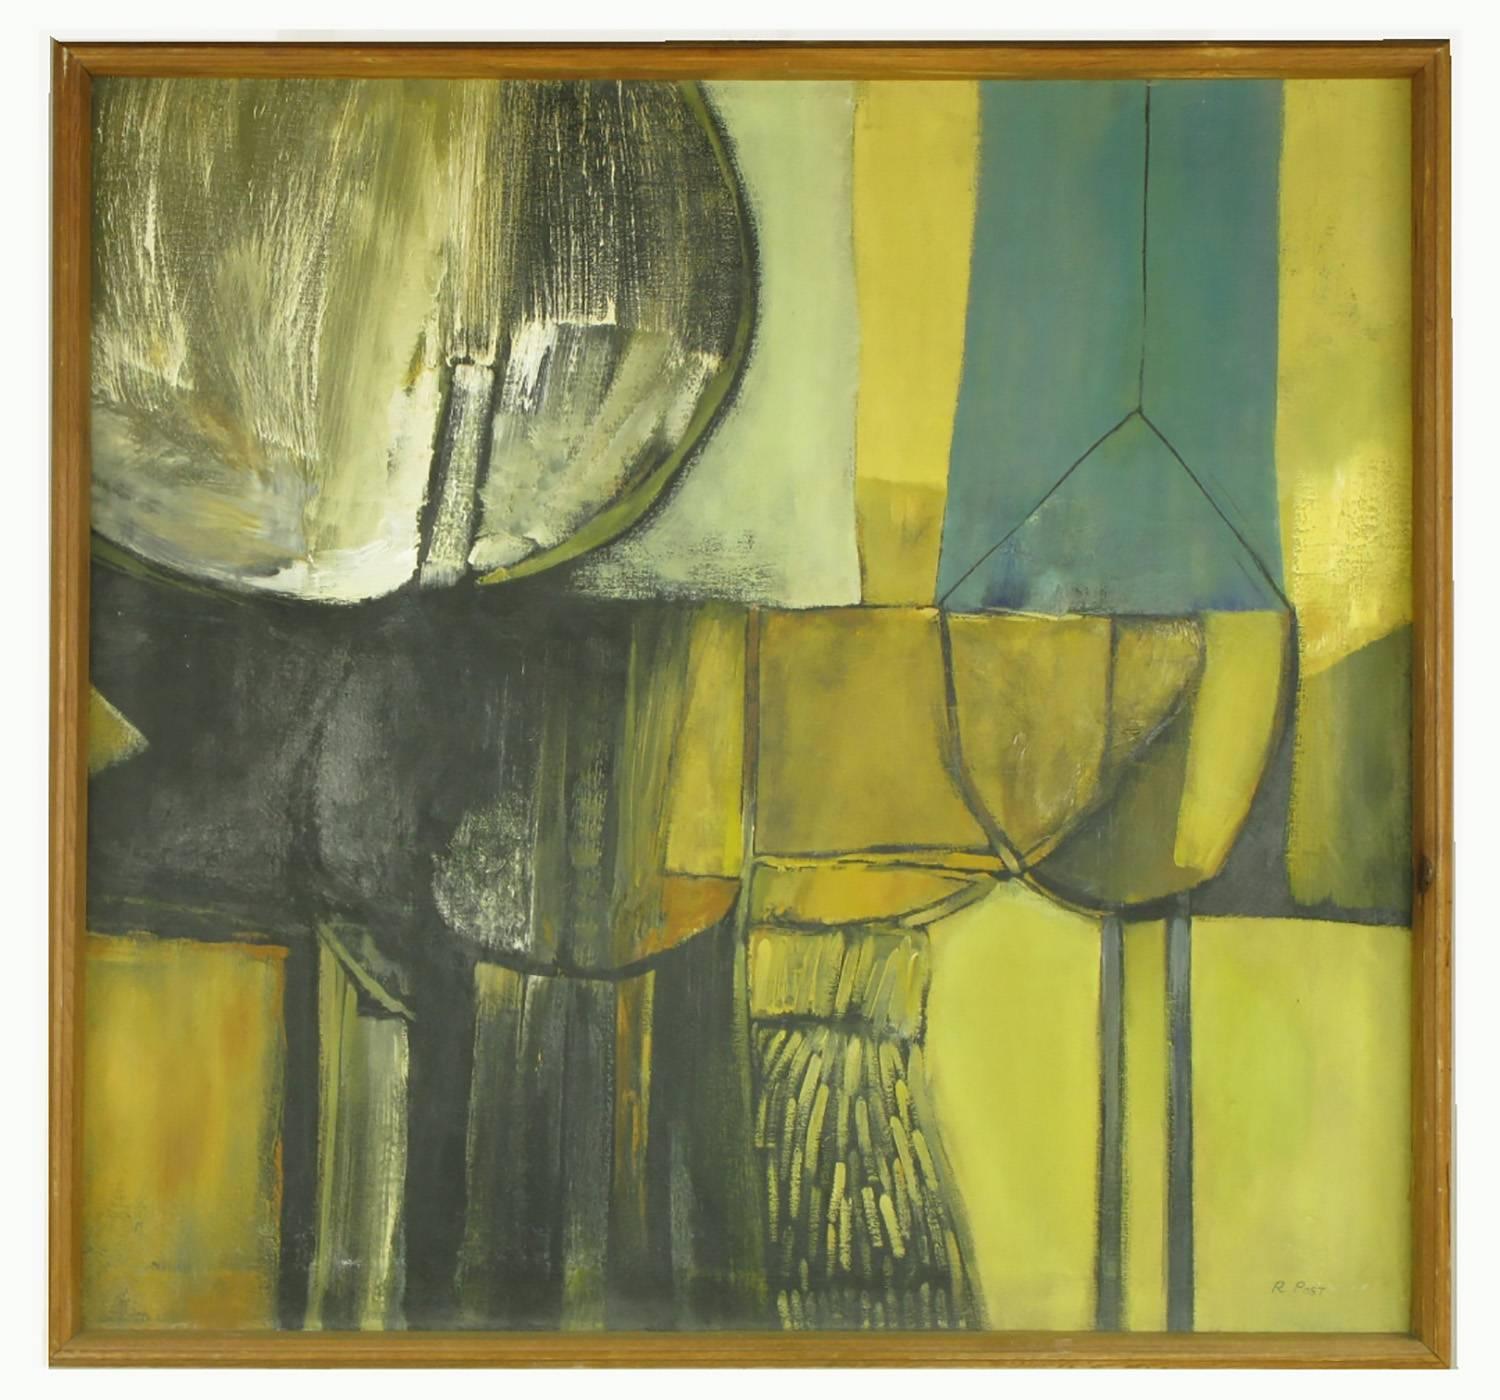 Terrific oil painting on canvass signed R.Post. Abstract Expressionist color and movement with cubist style shapes created by intersecting straight and curved lines. Ochre, teal, black and white colors combine to form shapes of circles, squares and